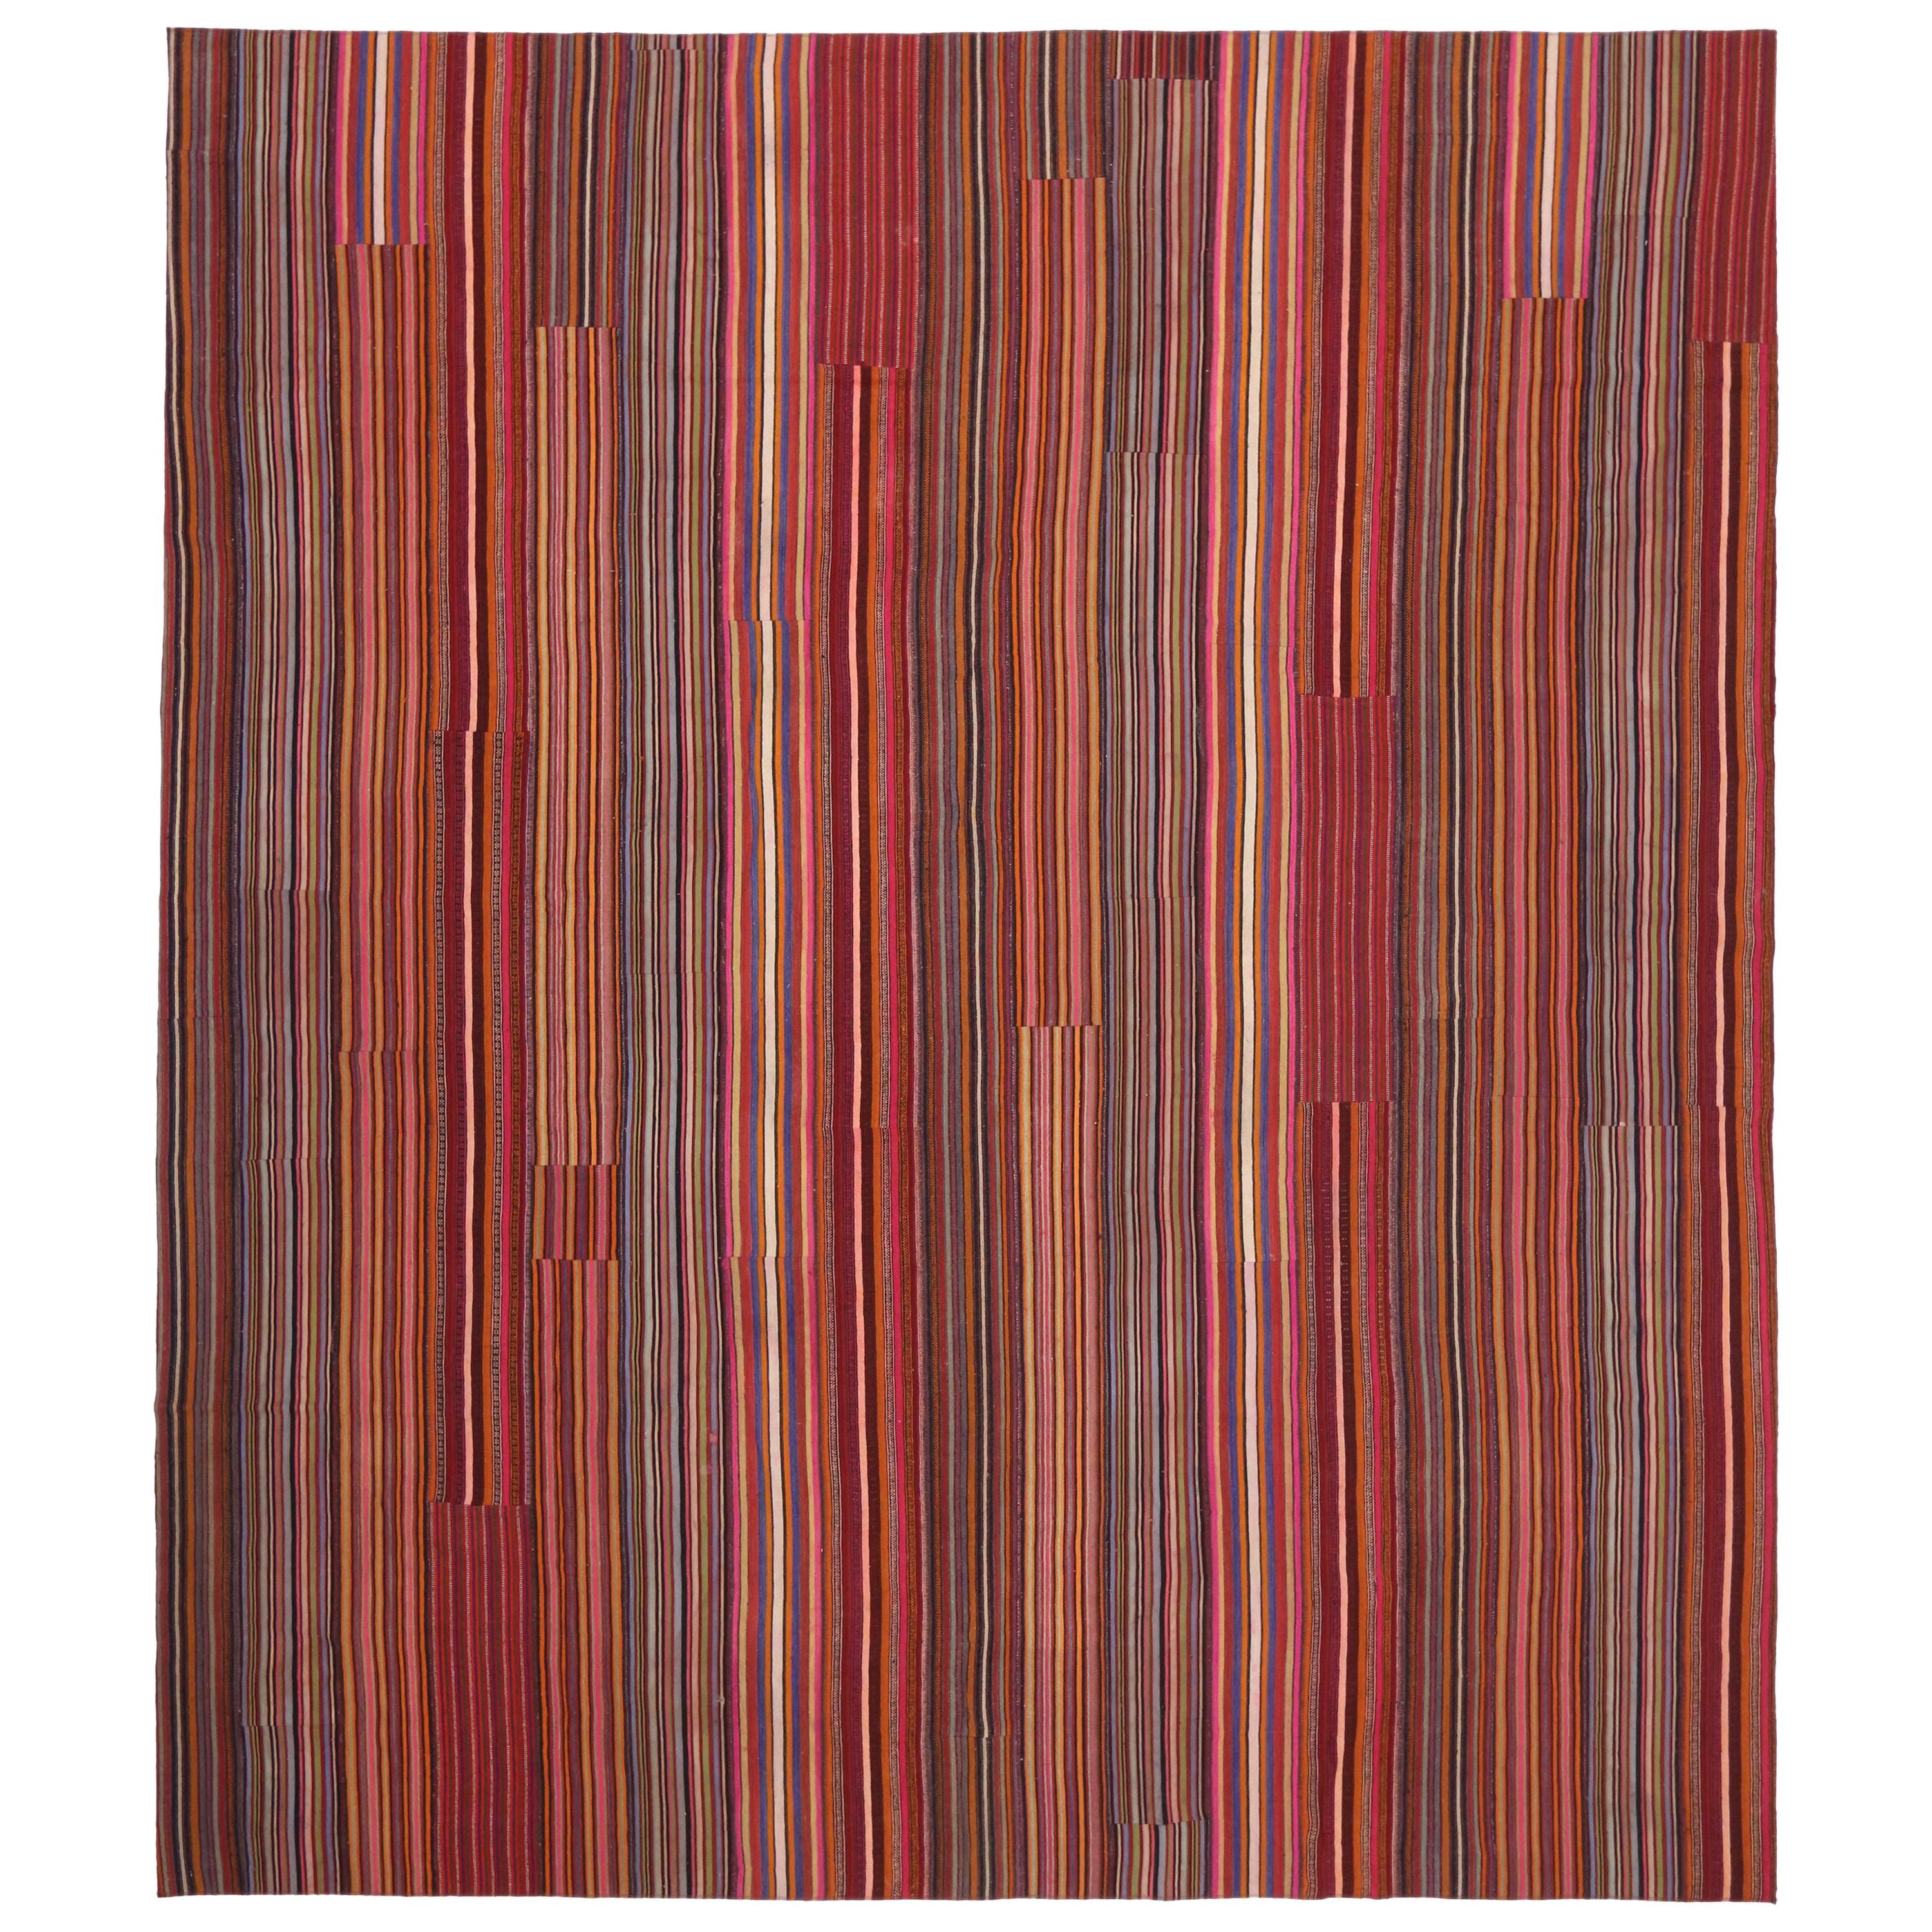 Distressed Vintage Turkish Striped Kilim Rug with Modern Rustic Cabin Style